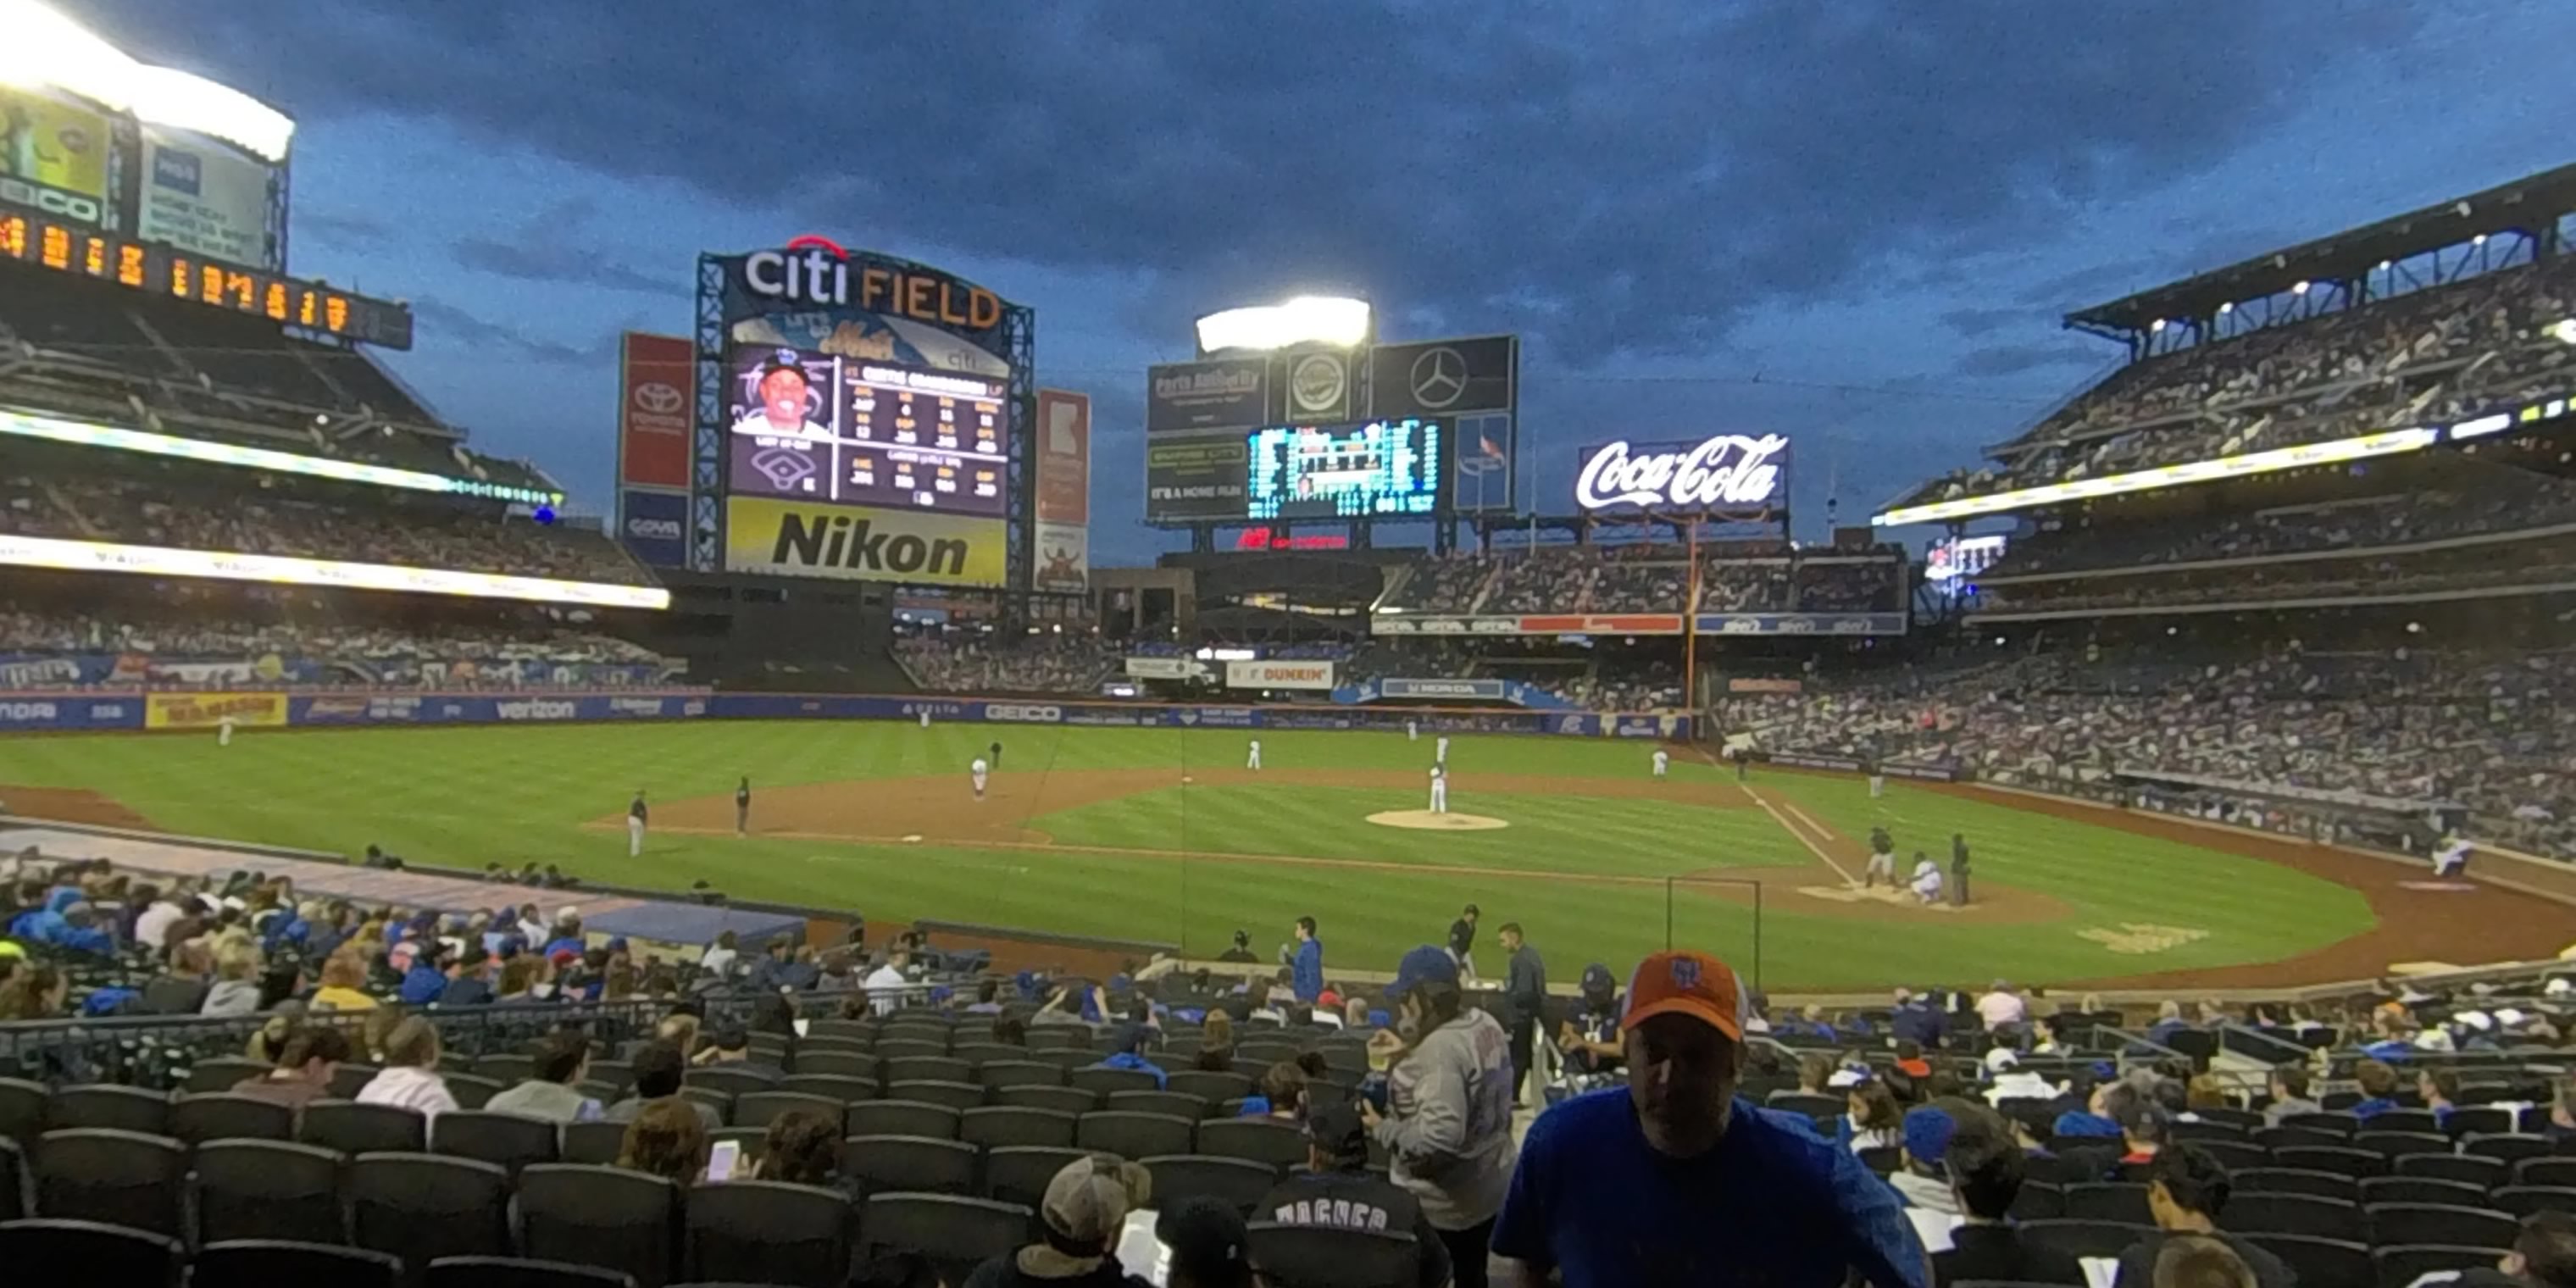 section 18 panoramic seat view  - citi field